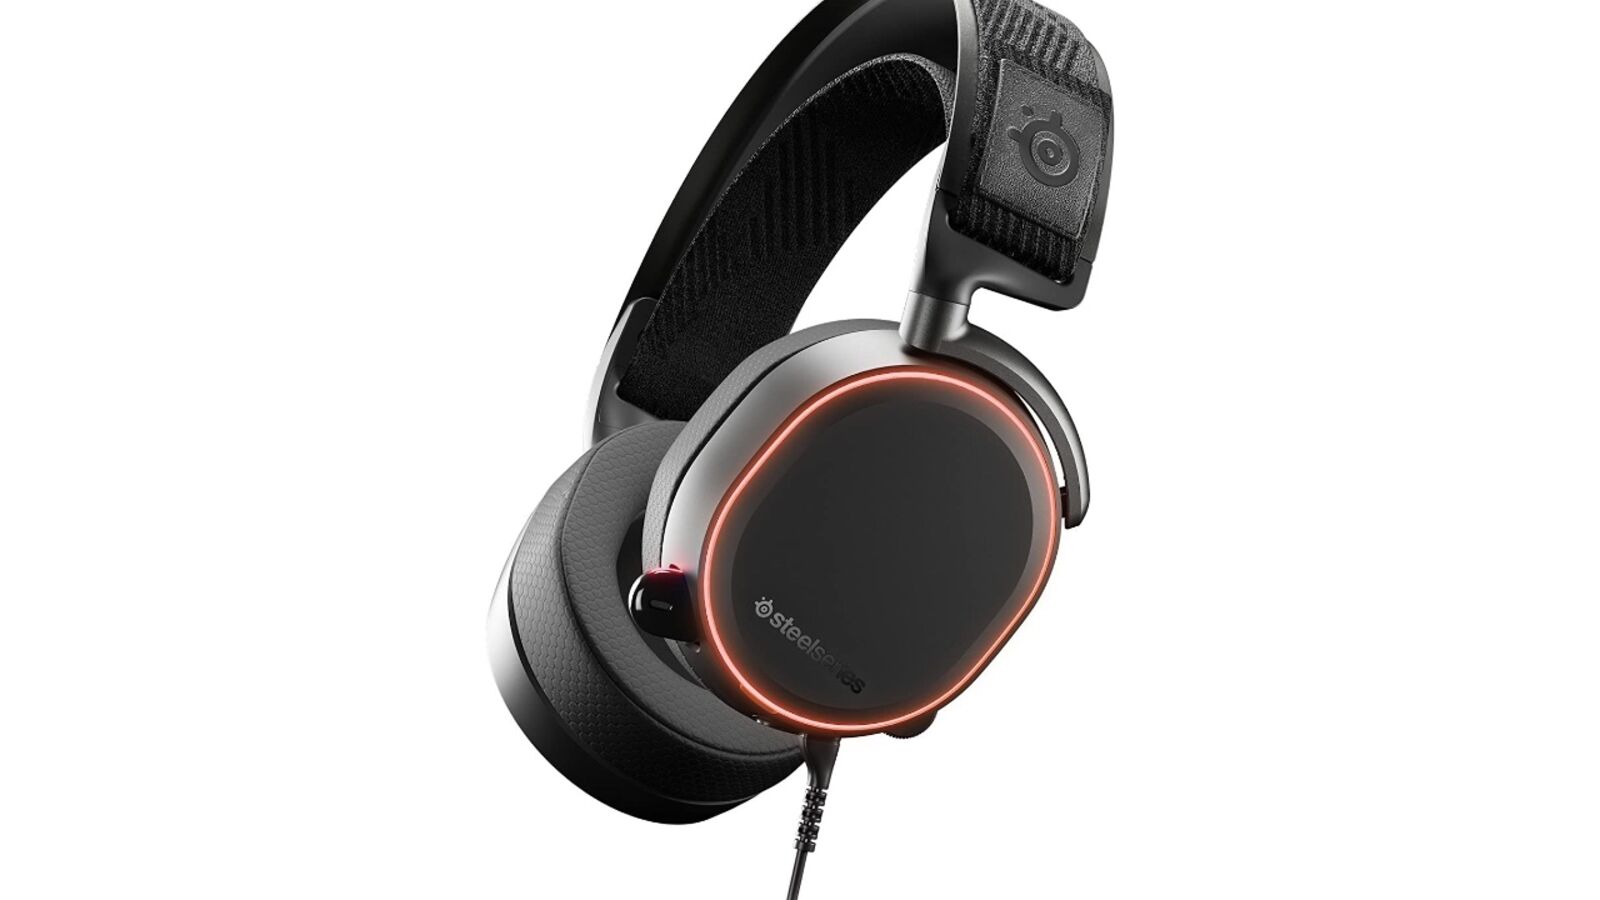 Save £70 on this SteelSeries Arctis Pro gaming headset